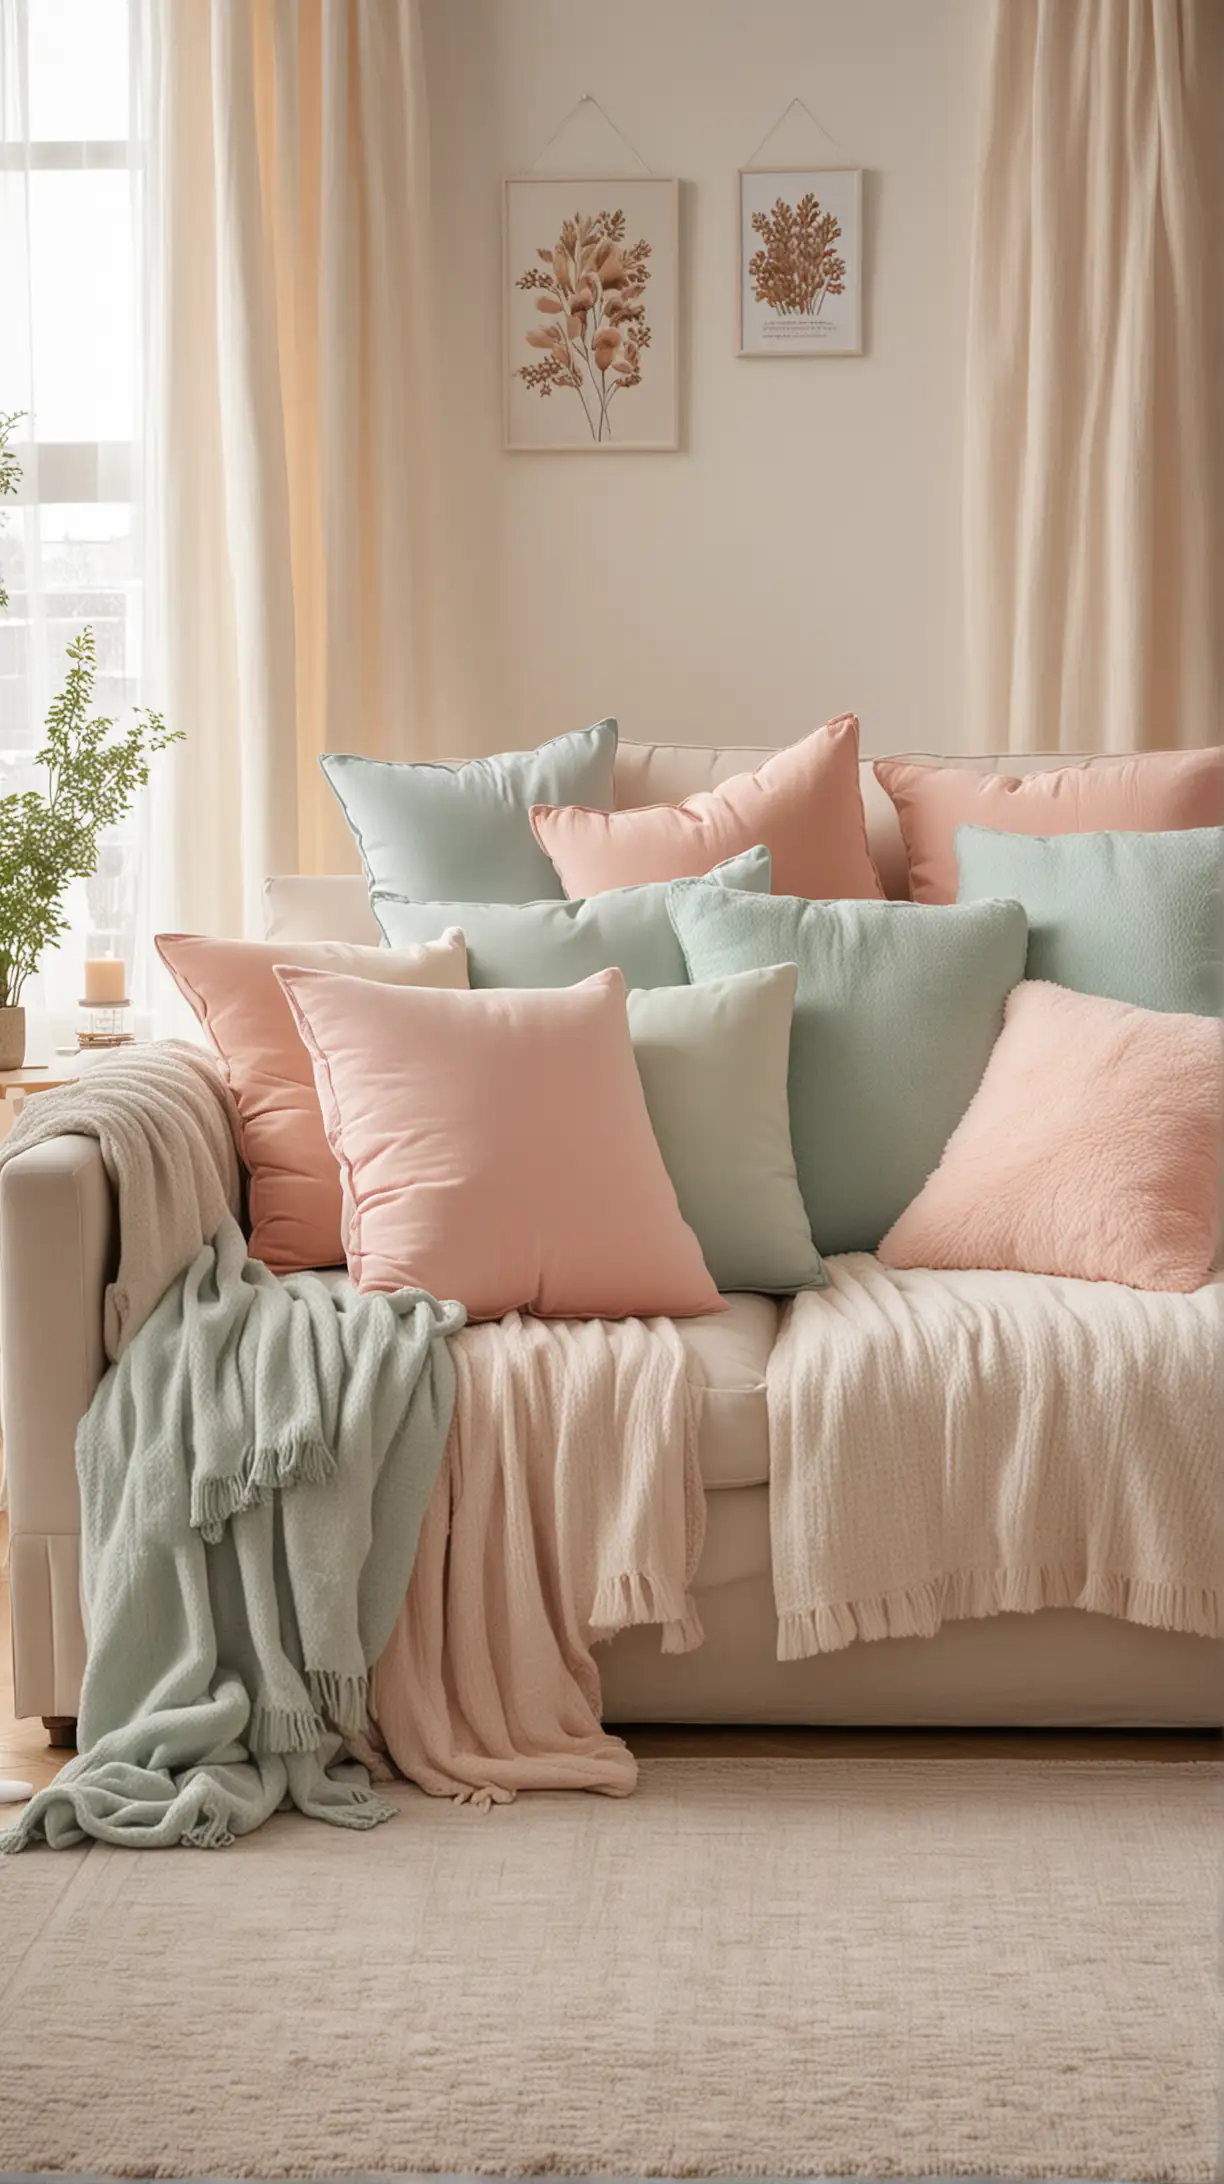 Cozy Living Room with Soft Pastel Pillows and Plush Sofa